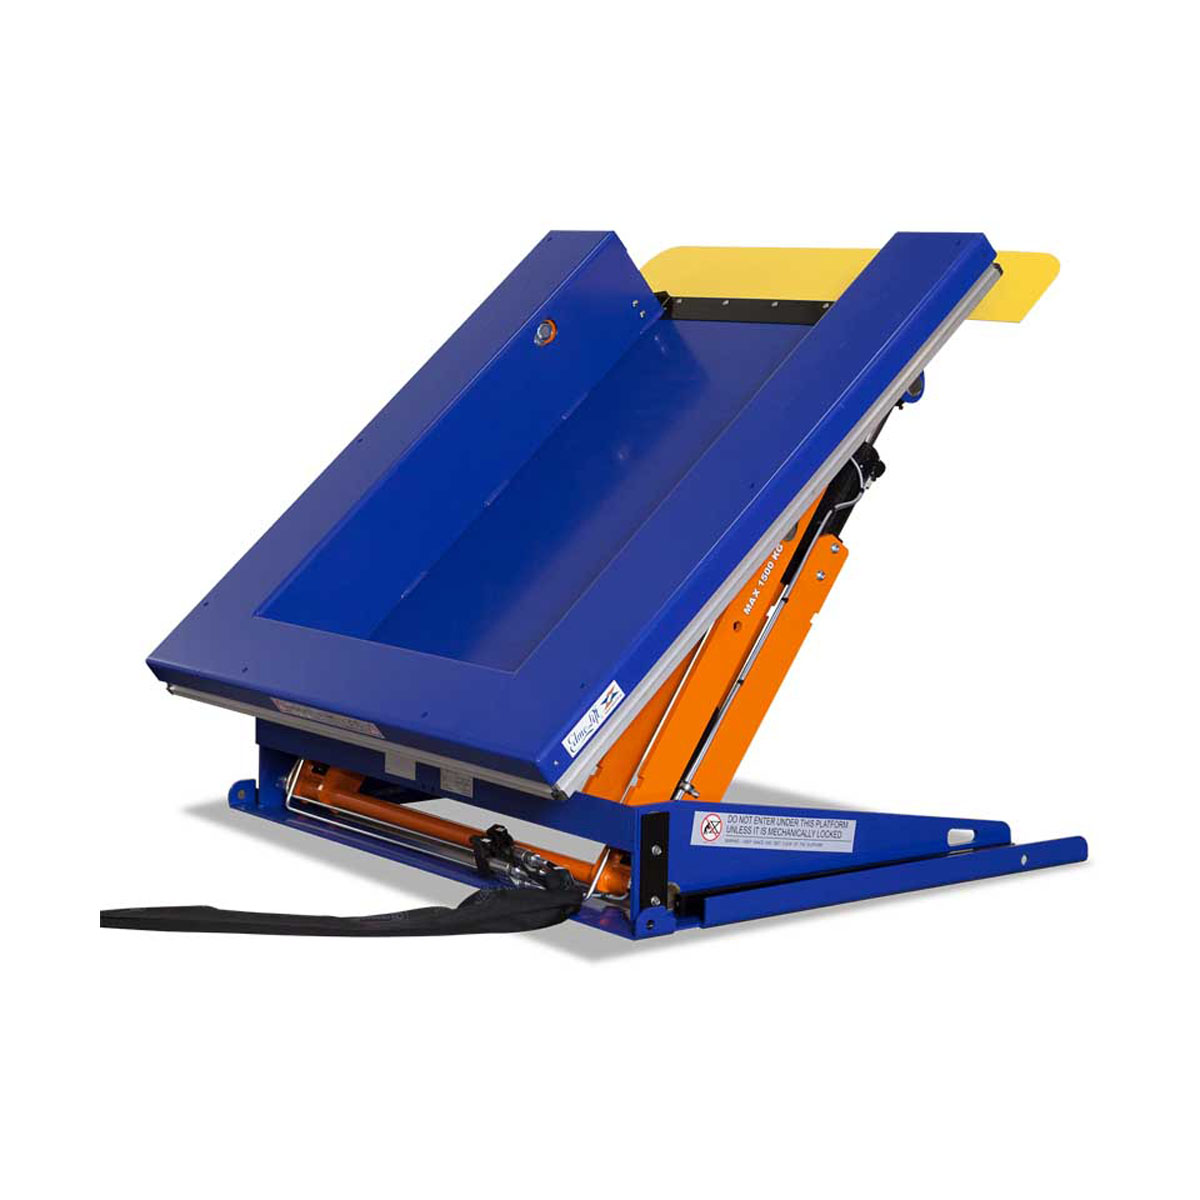 Buy Tilting Lift Table Arm-Lift  in Tilt Lift Tables from Edmolift available at Astrolift NZ